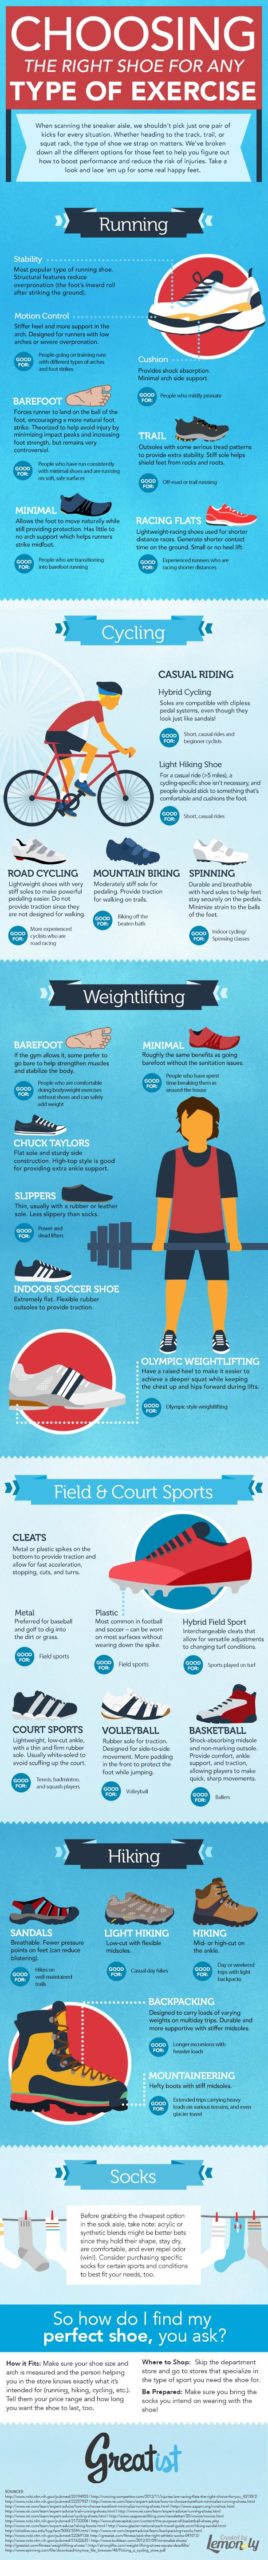 This Infographic Will Help You Find The Perfect Shoe For Any Workout